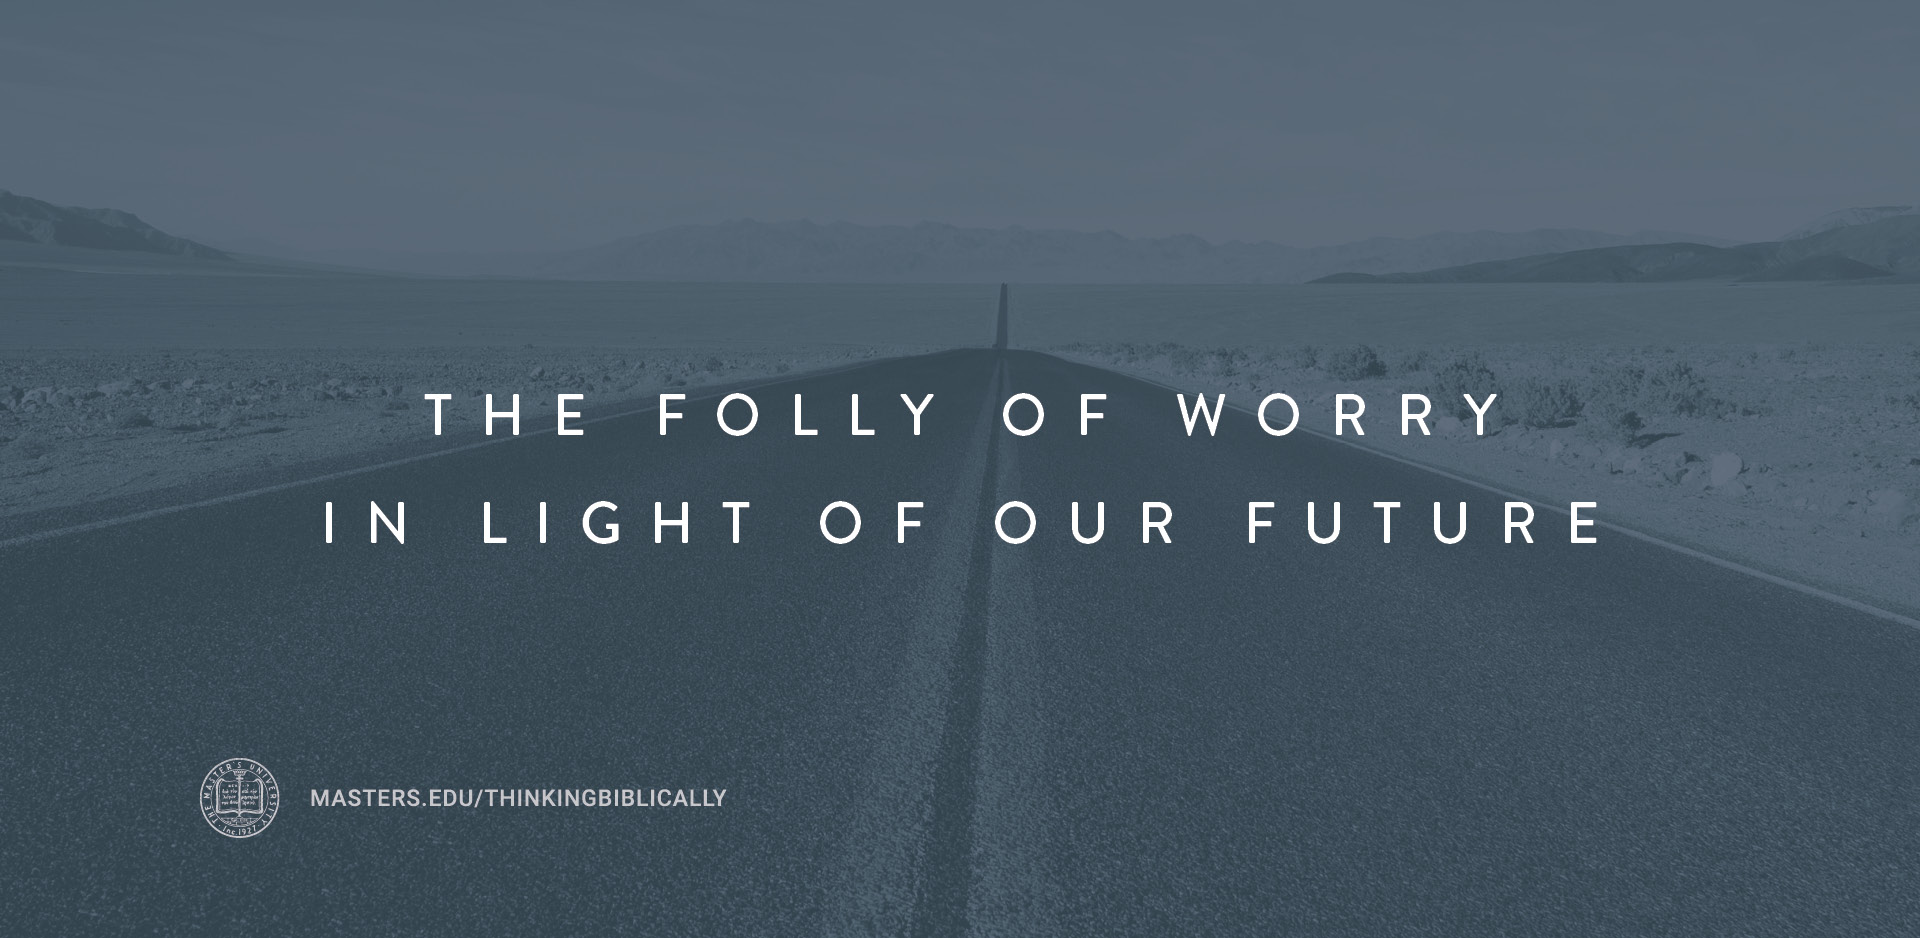 The Folly of Worry in Light of Our Future Featured Image